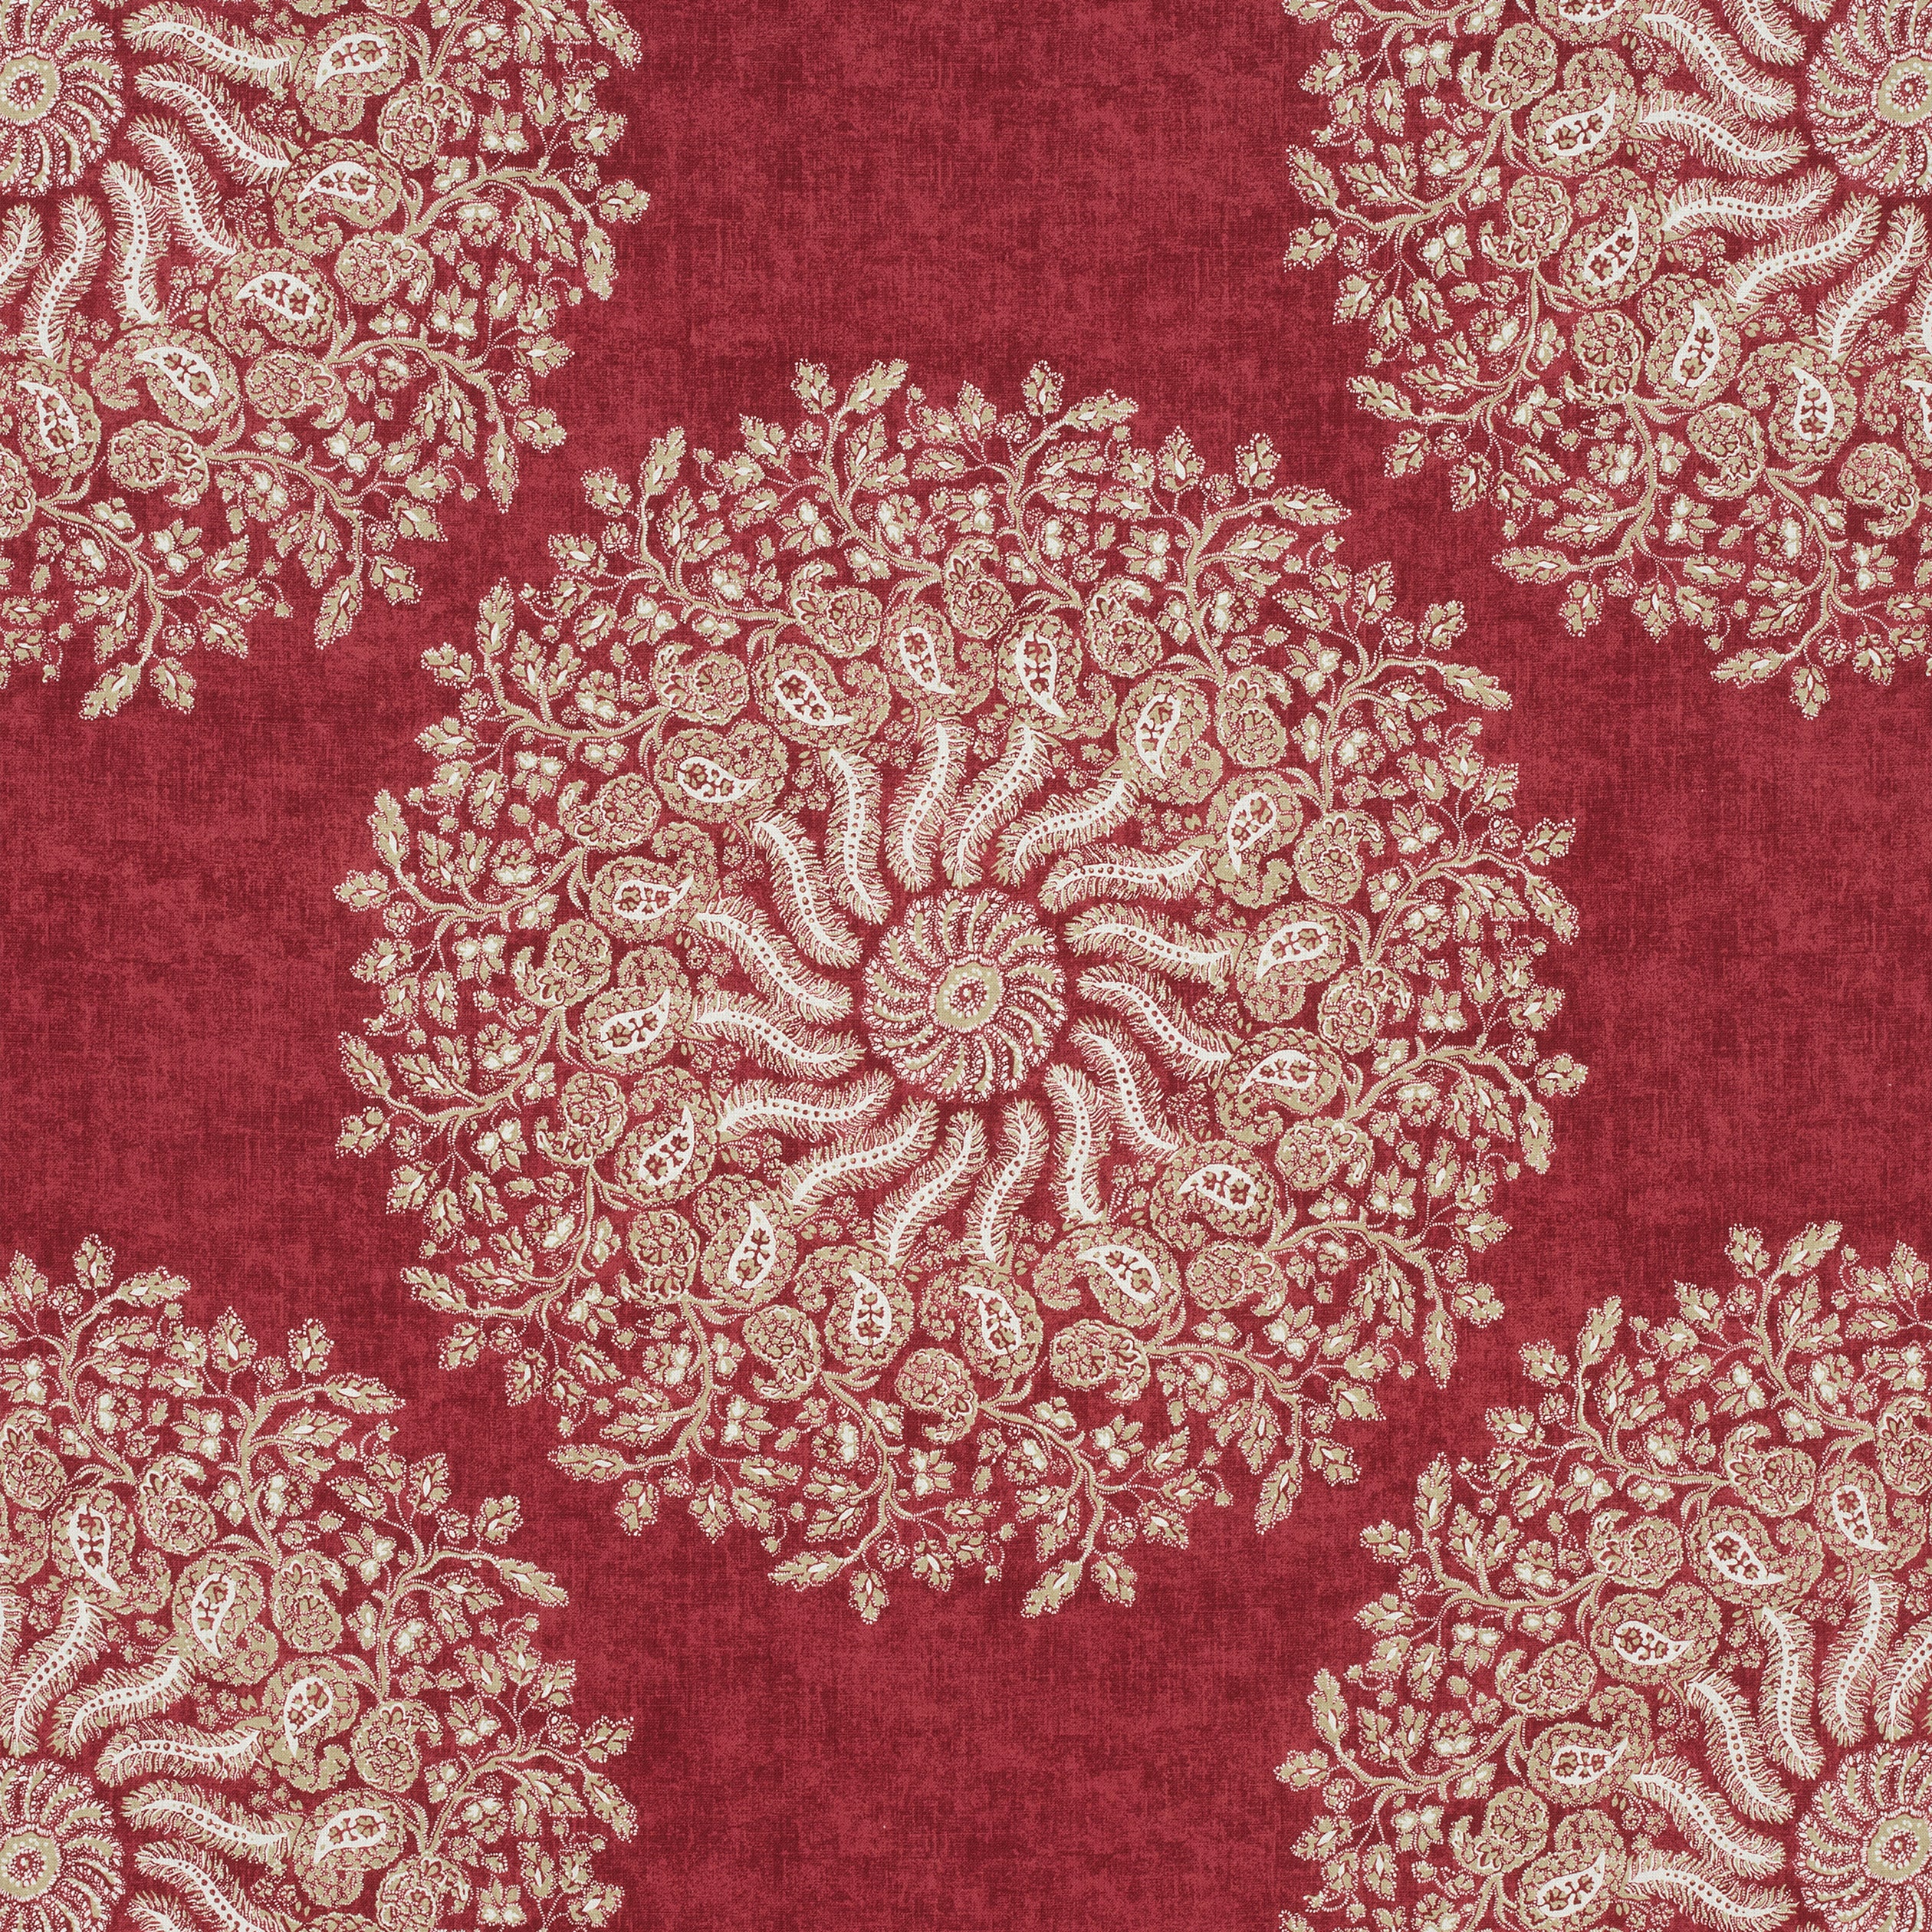 La Provence fabric in red color - pattern number AF78728 - by Anna French in the Palampore collection